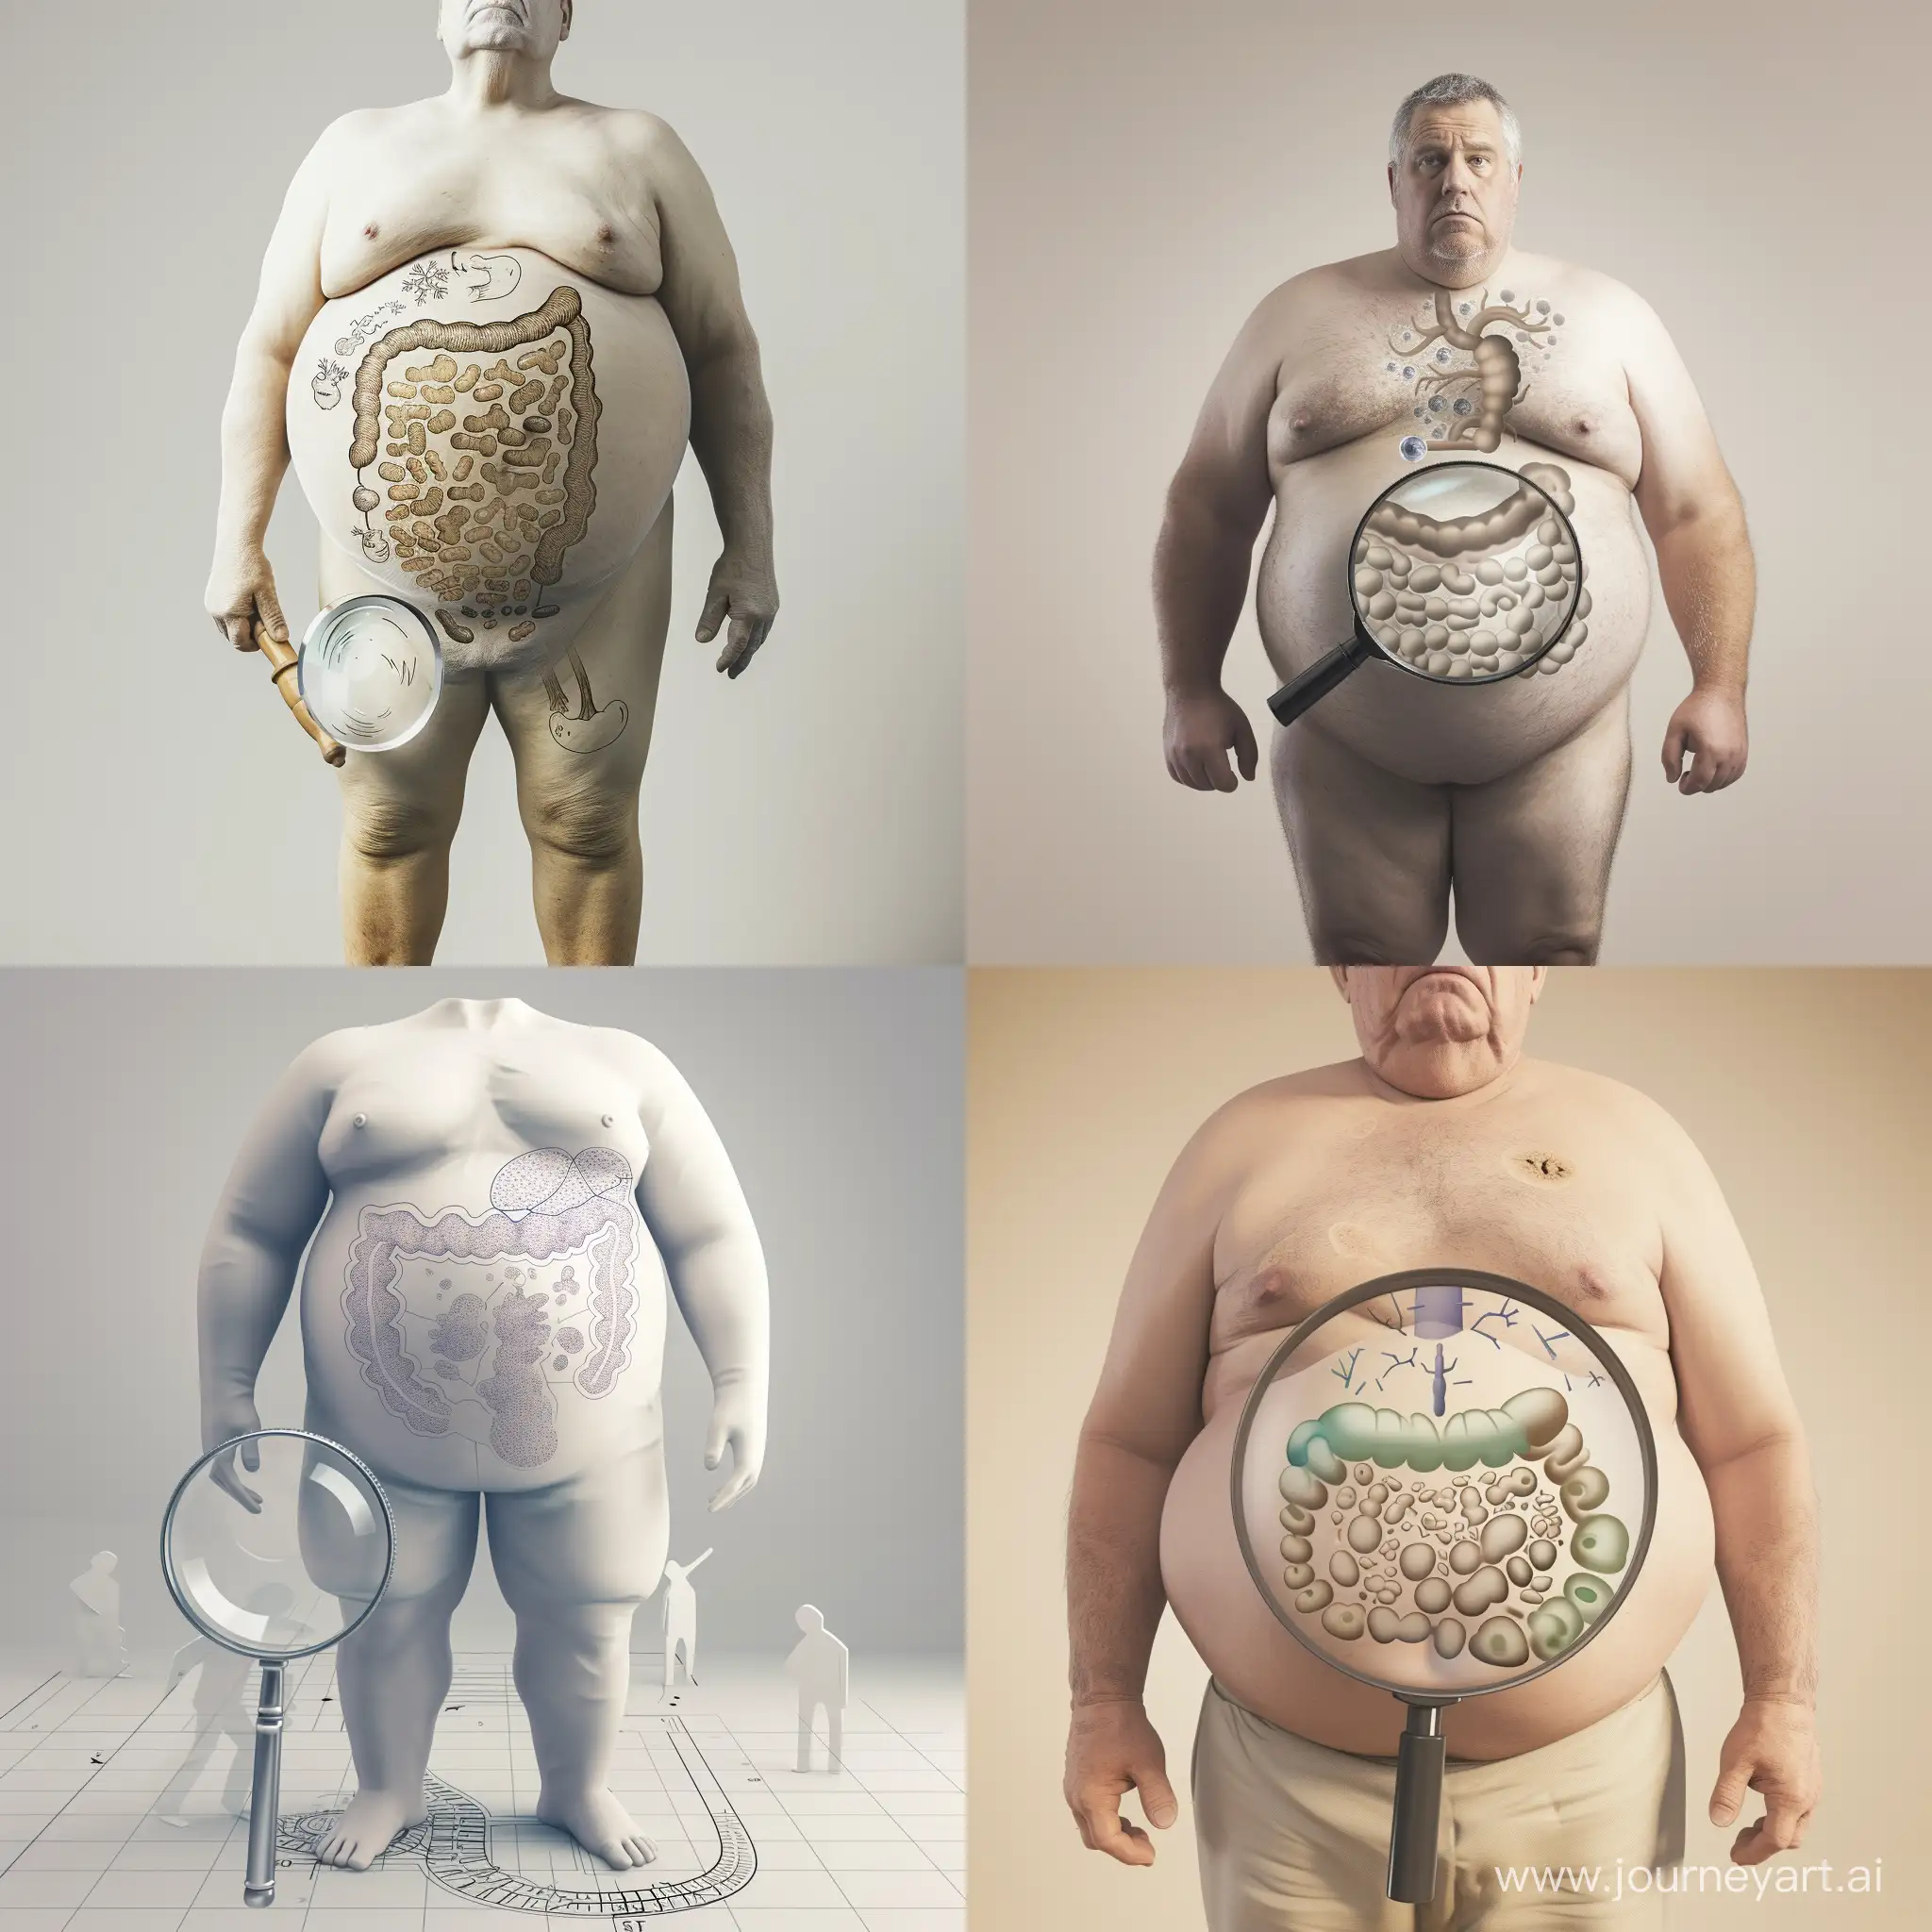 Draw me a tall picture of a person with white skin. There is no need for his body parts to be clear. His height should be around 170 and he should be obese. Draw a large magnifying glass on his stomach that details the shape of the gut and the gut microbiome.